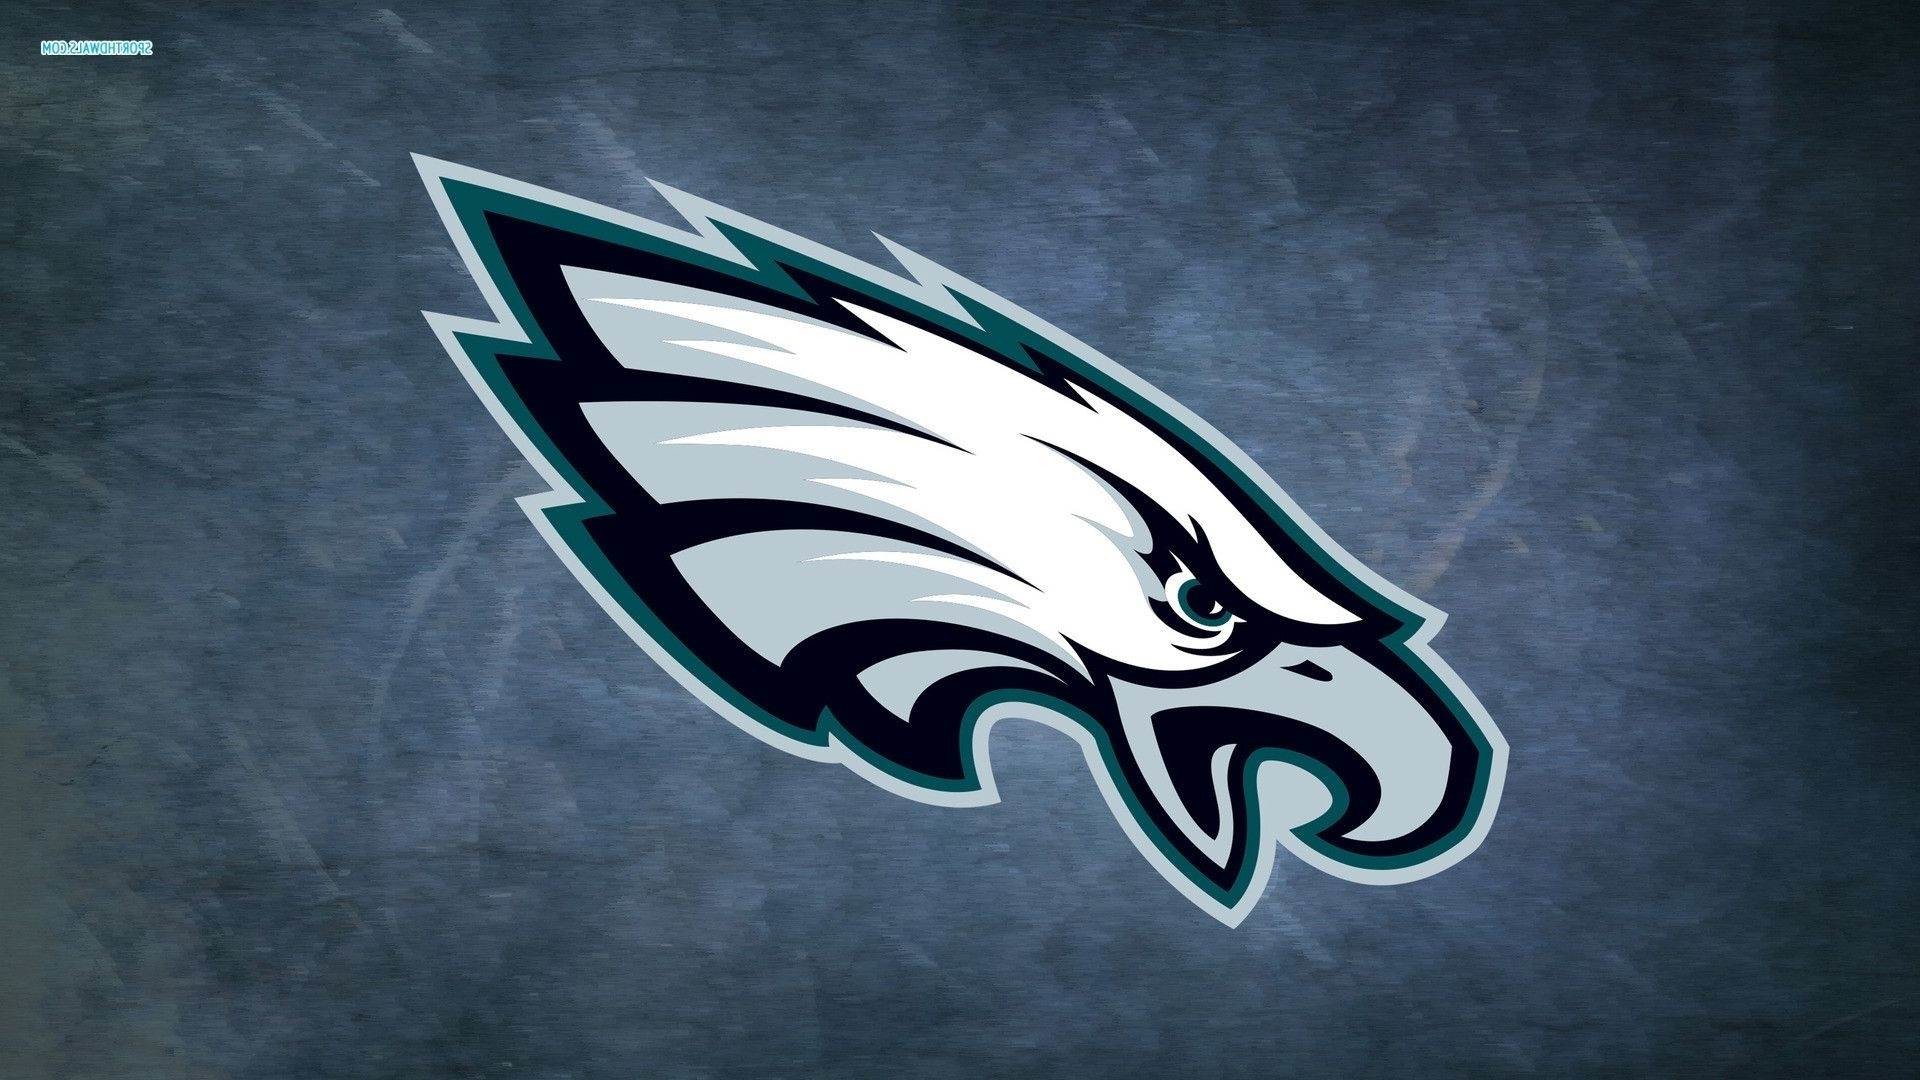 1920x1080 + images about Philly boy on Pinterest Stop signs, Bunker 1440Ã900 Free  Philadelphia Â· Philadelphia Eagles WallpaperEagle ...